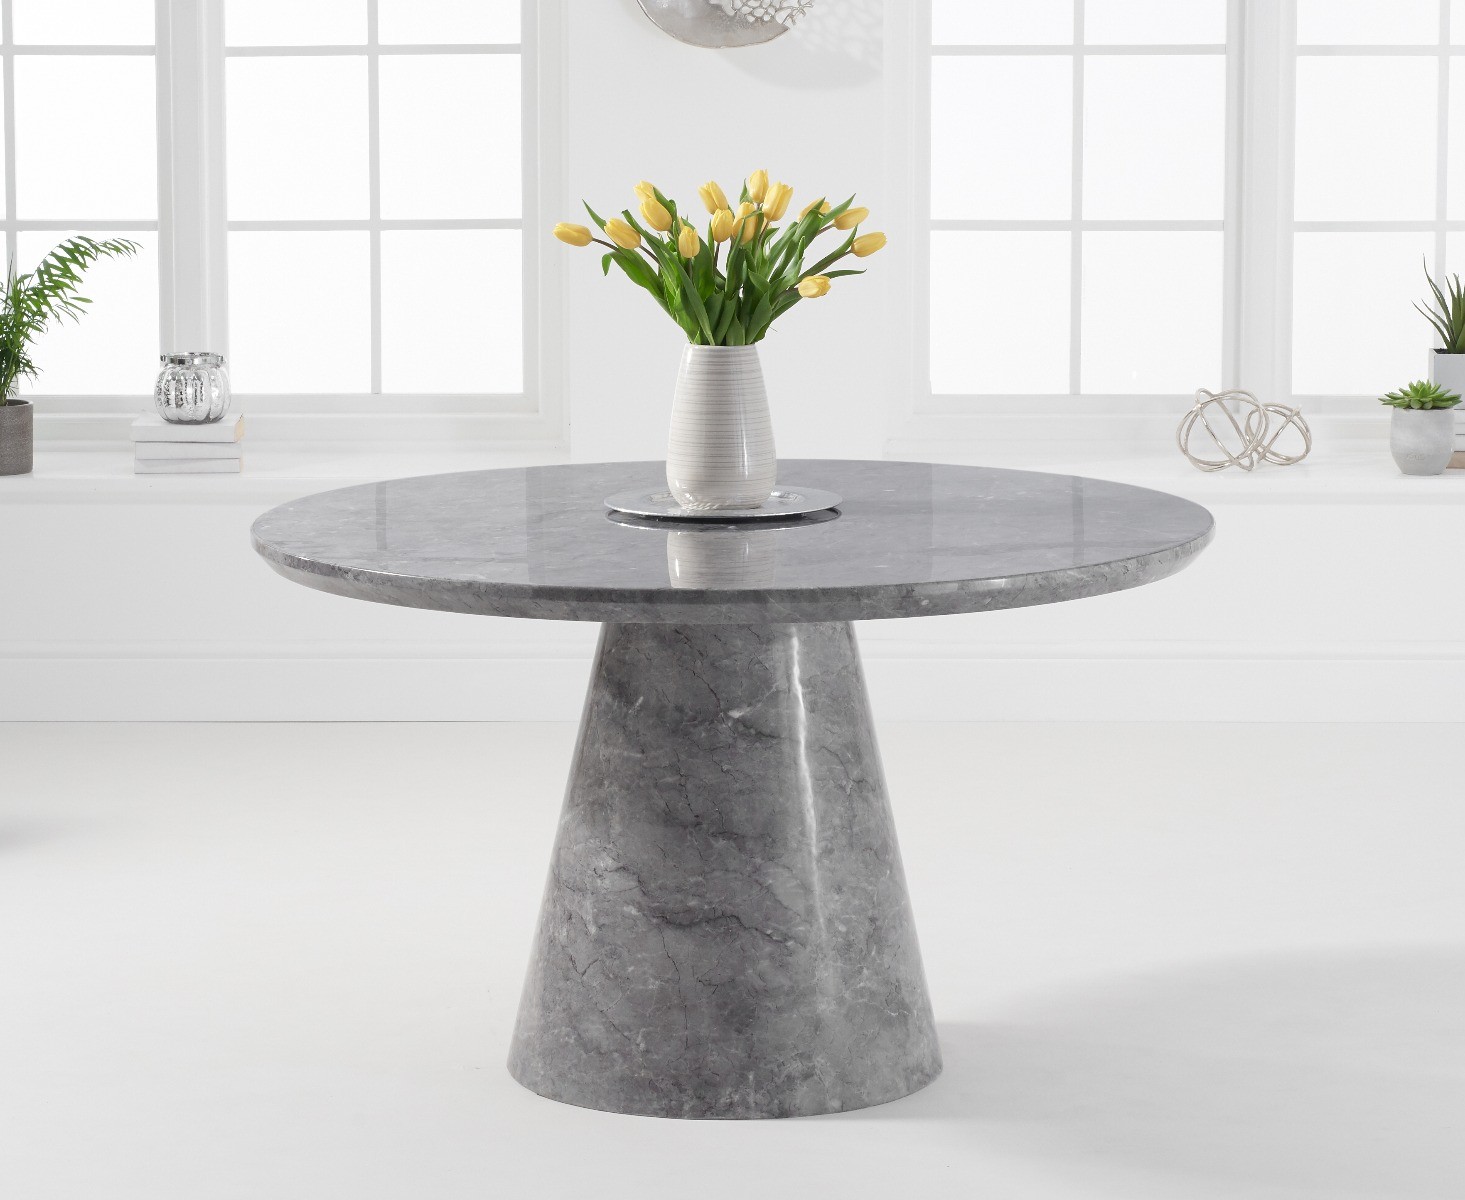 Photo 2 of Ravello 130cm round grey marble dining table with 4 cream francesca chairs